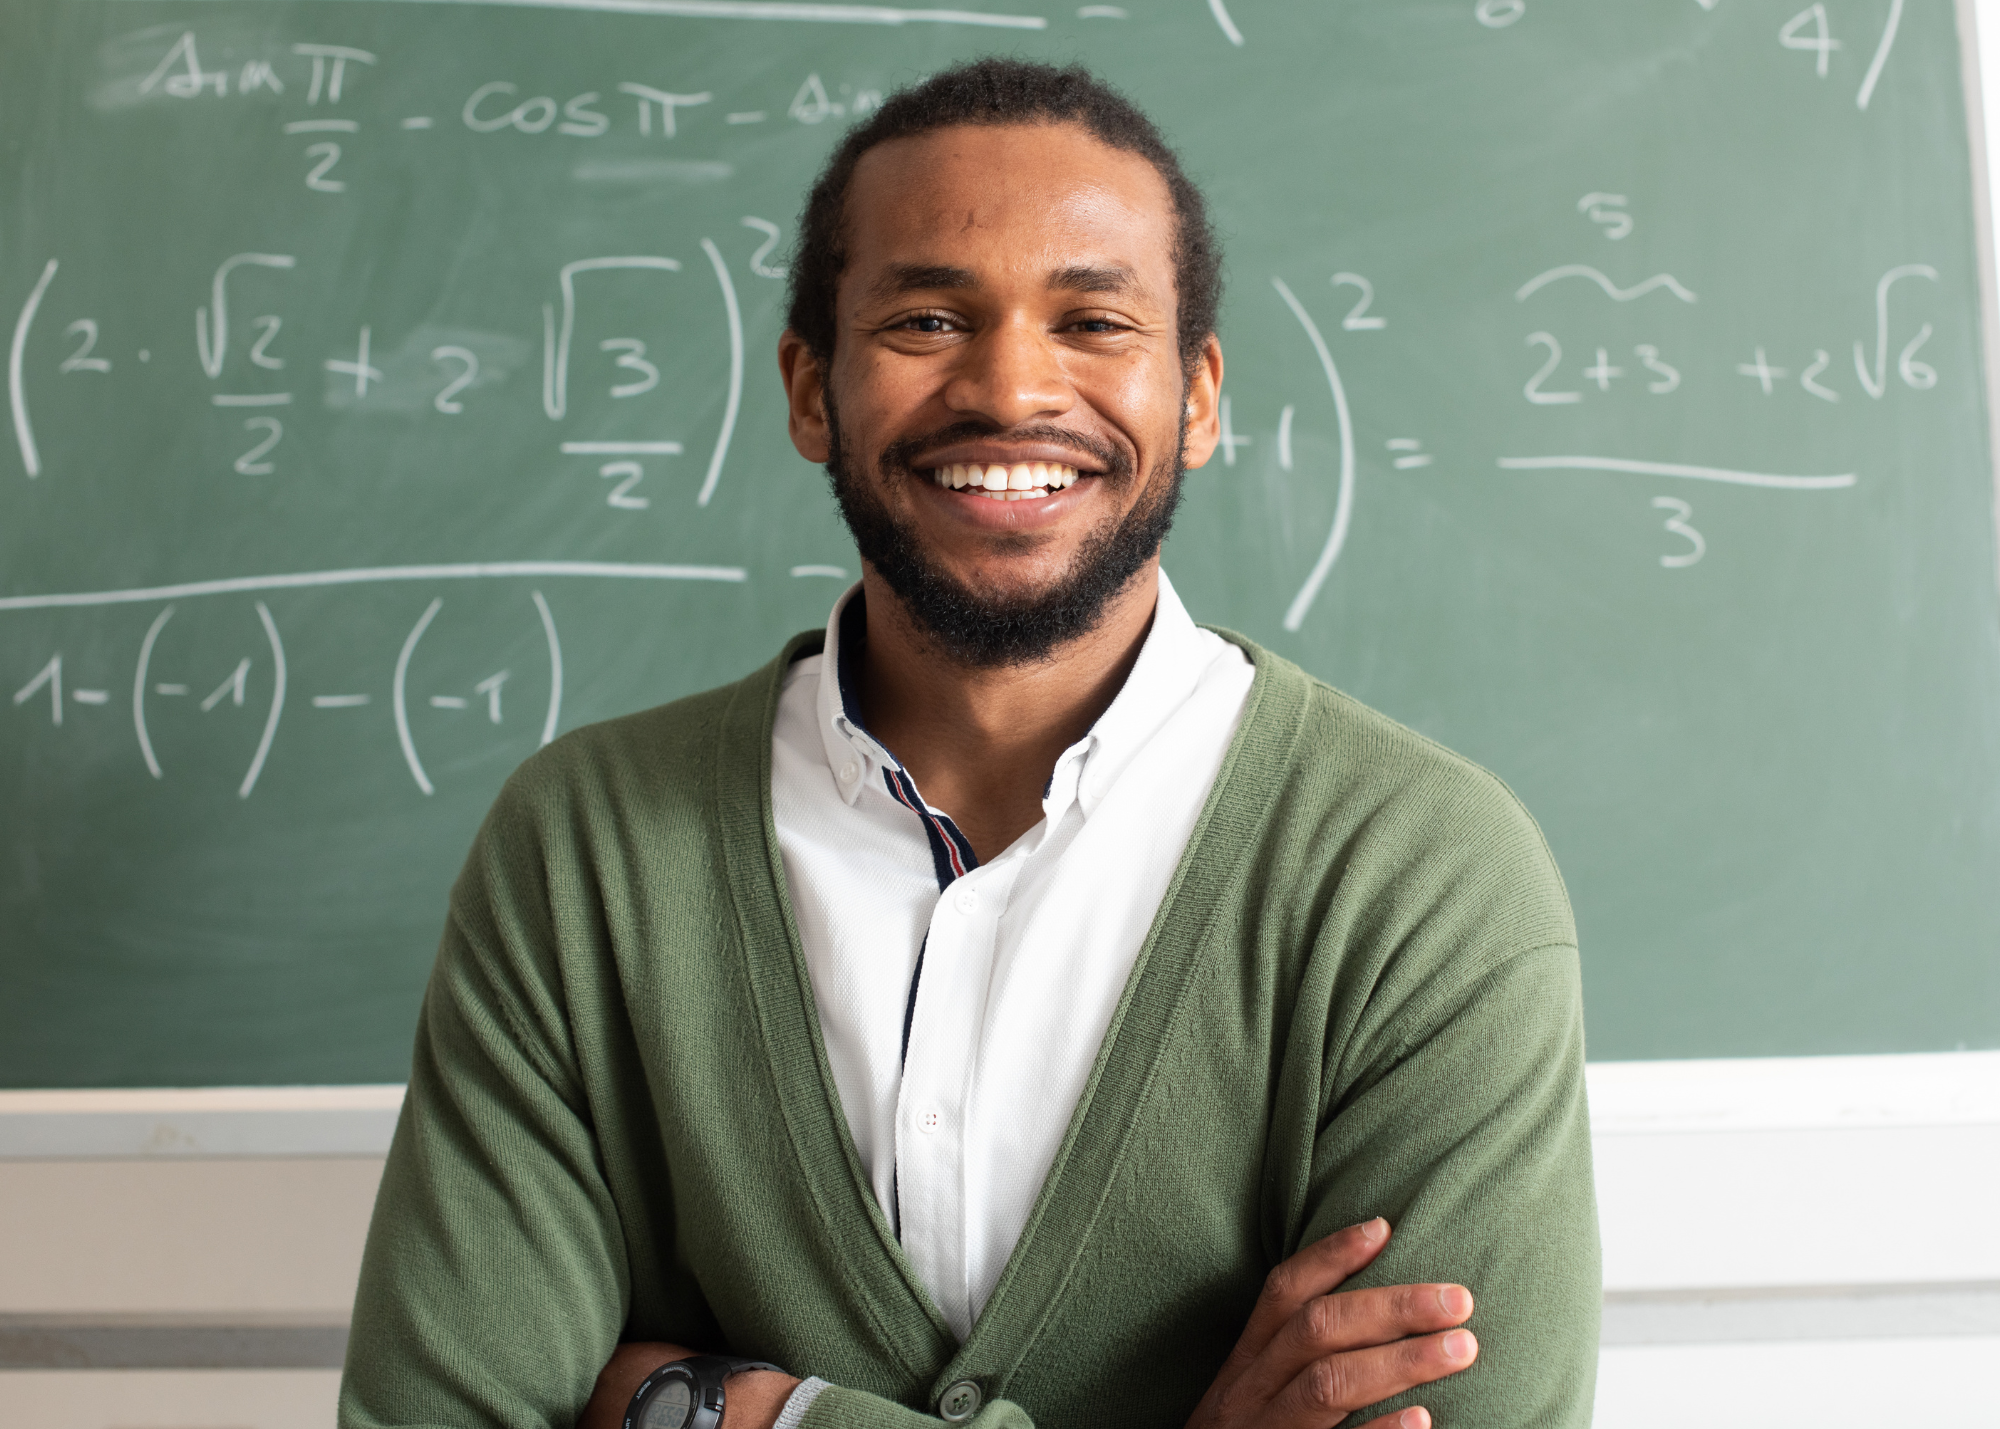 Male teacher with arms crossed in front of chalkboard smiling